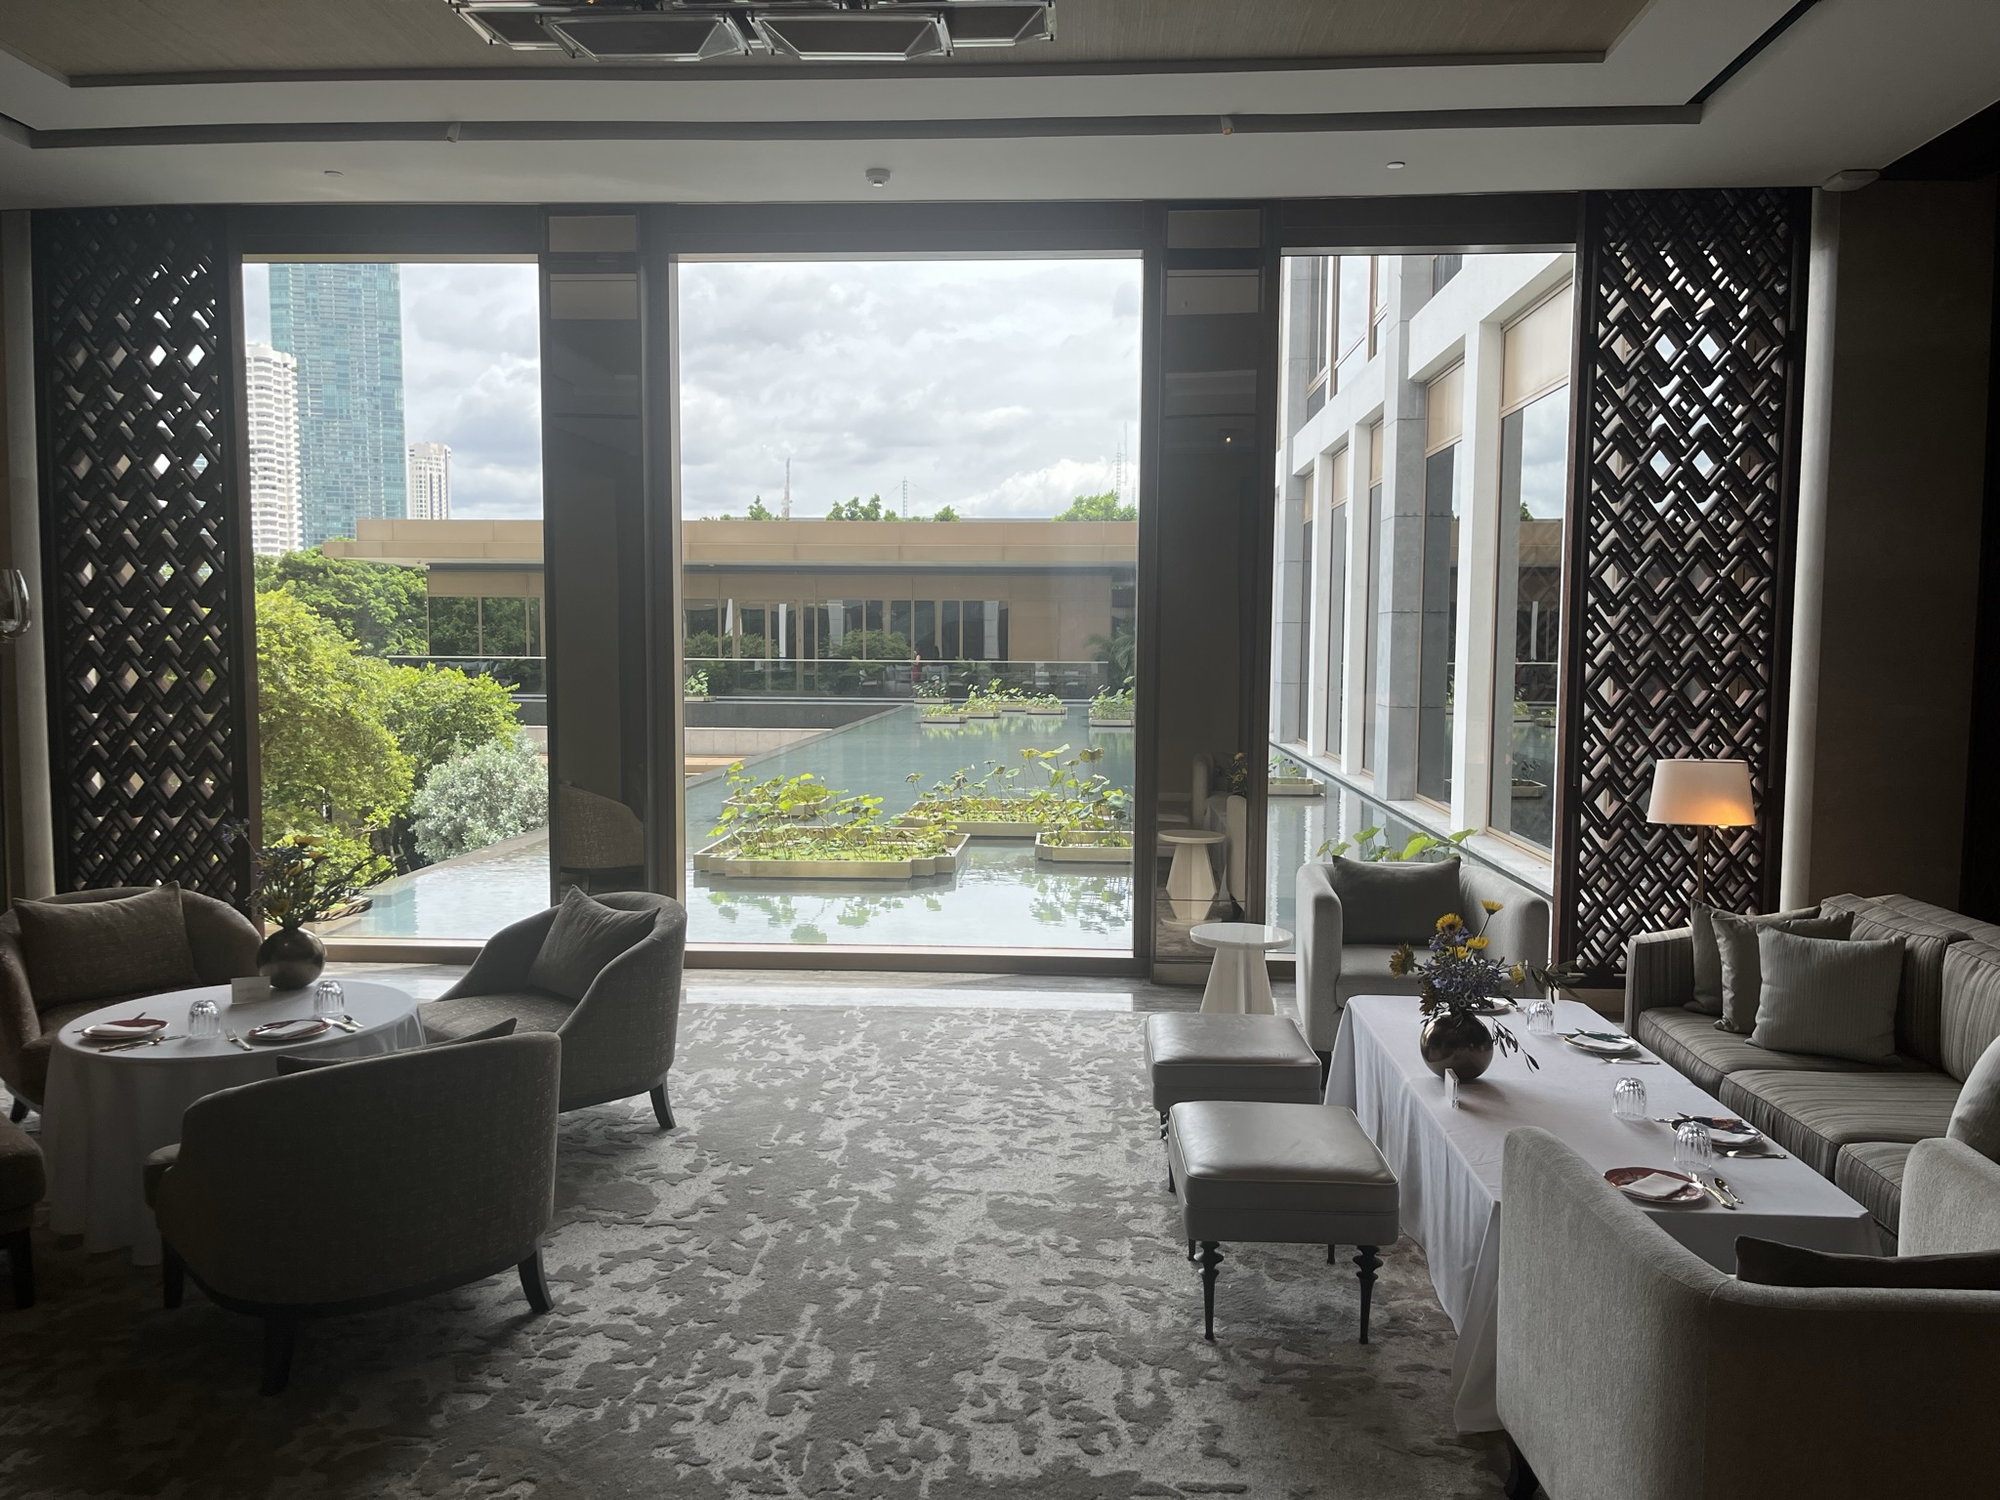 Ritz-Carlton hotel in (One) Bangkok (scheduled to open in 2025) - Page 2 -  FlyerTalk Forums